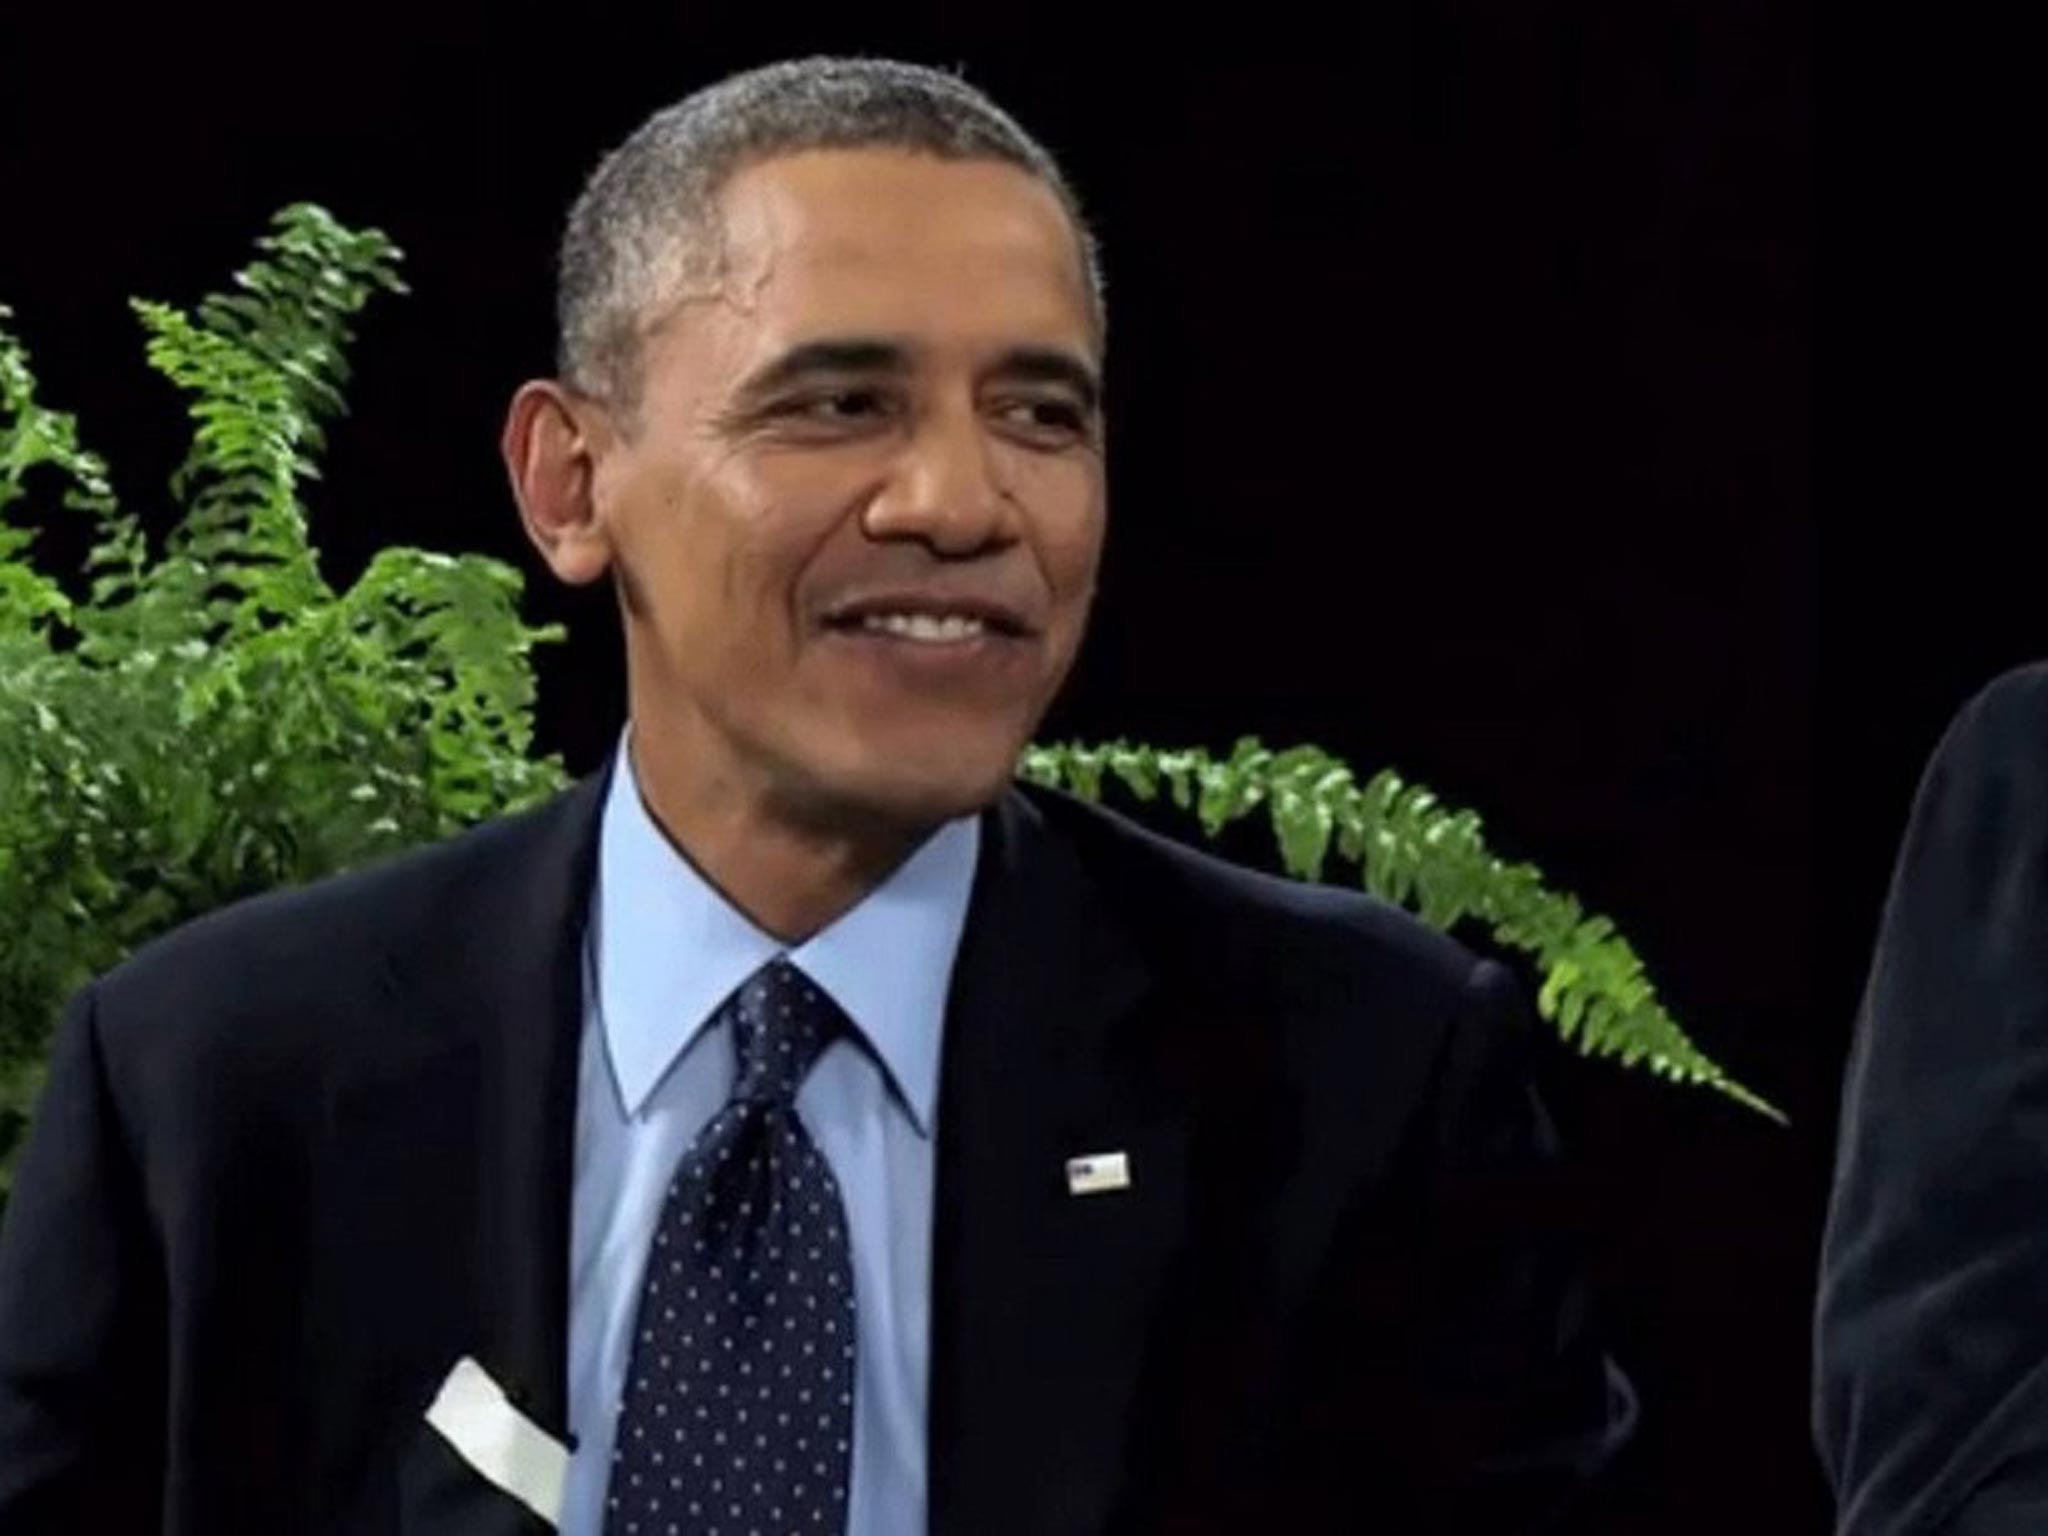 The grin reaper: Barack Obama on ‘Between Two Ferns’